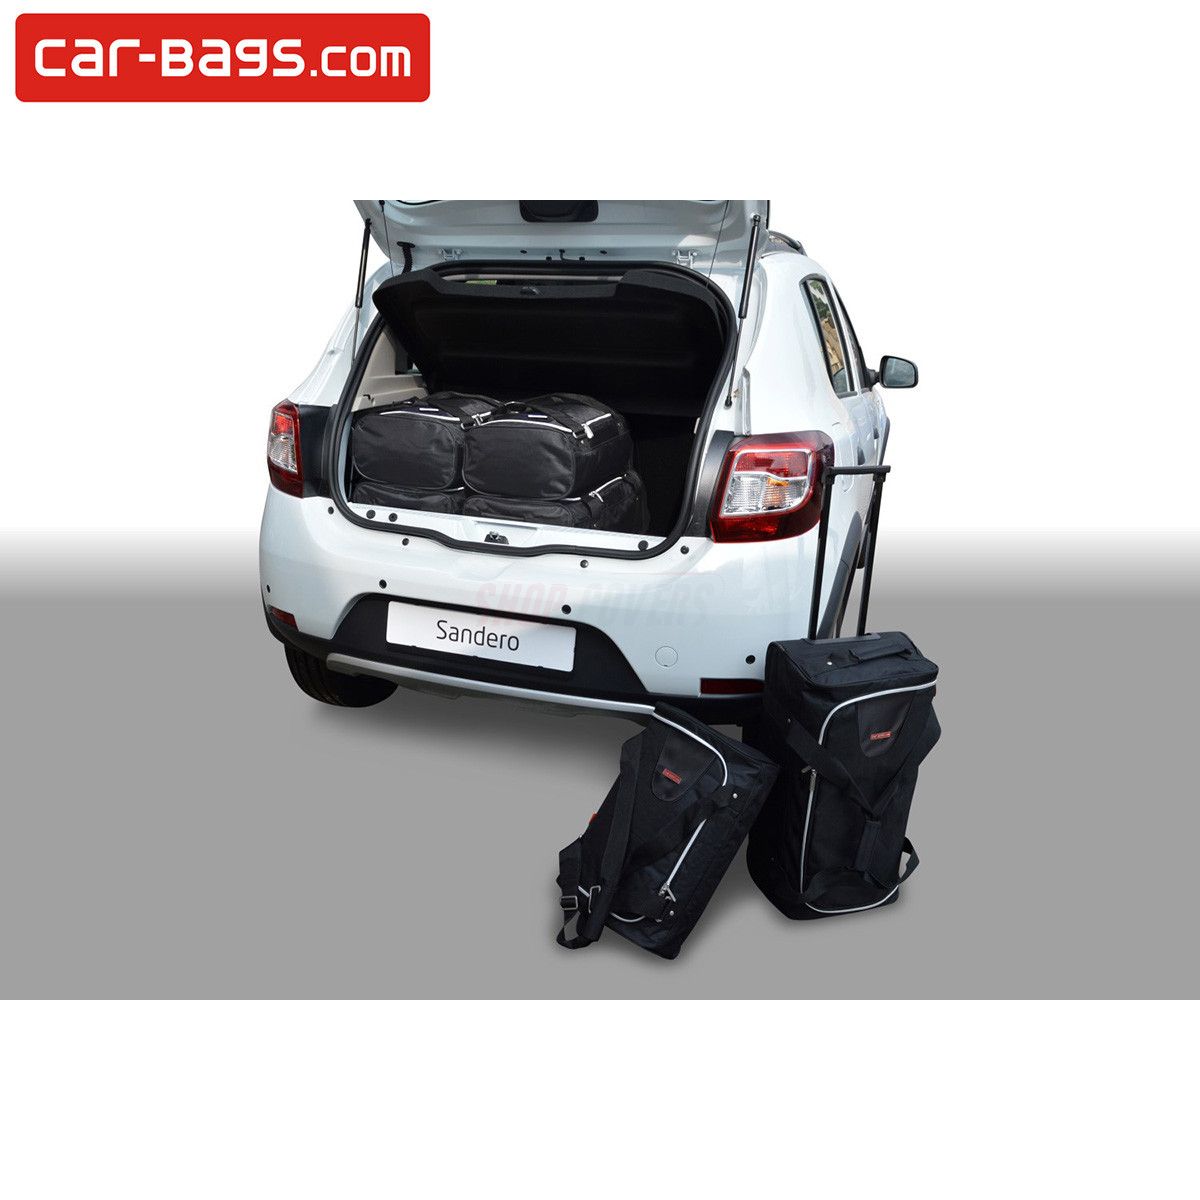 Travel bags fits Dacia Sandero tailor made (6 bags), Time and space saving  for € 379, Perfect fit Car Bags